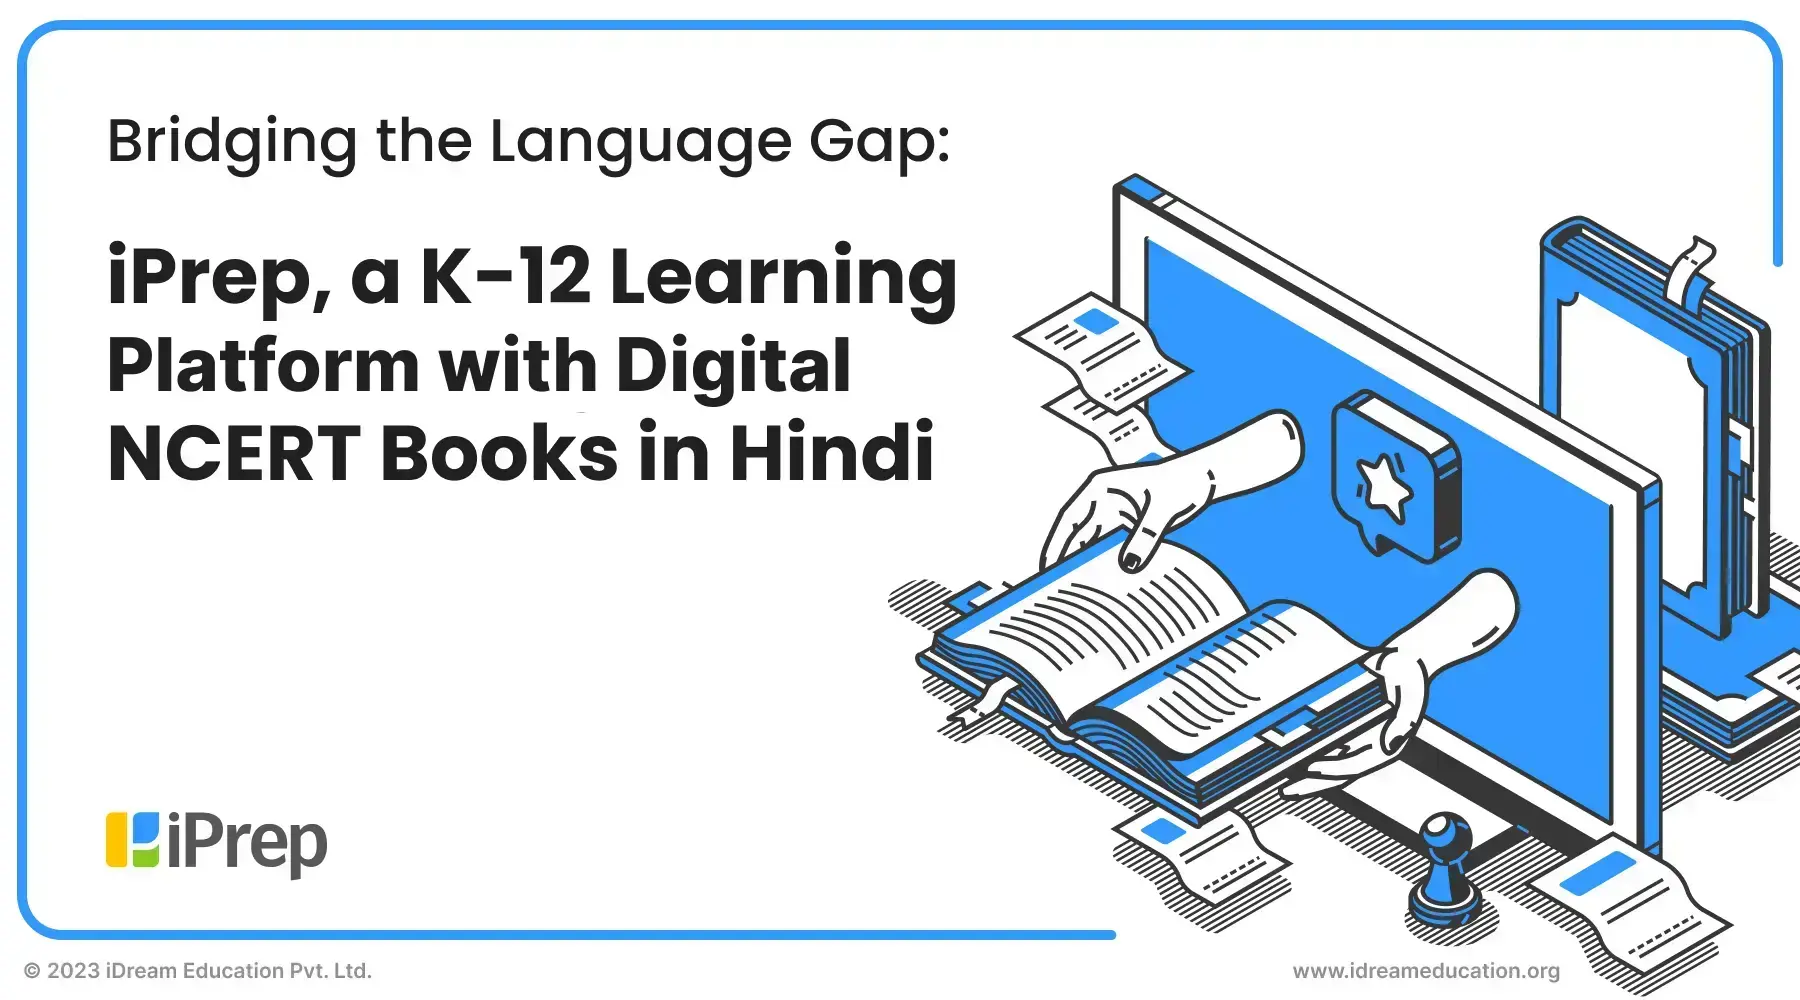 Cover image of a blog post highlighting digital NCERT books in Hindi available on the K-12 learning platform iPrep by iDream Education